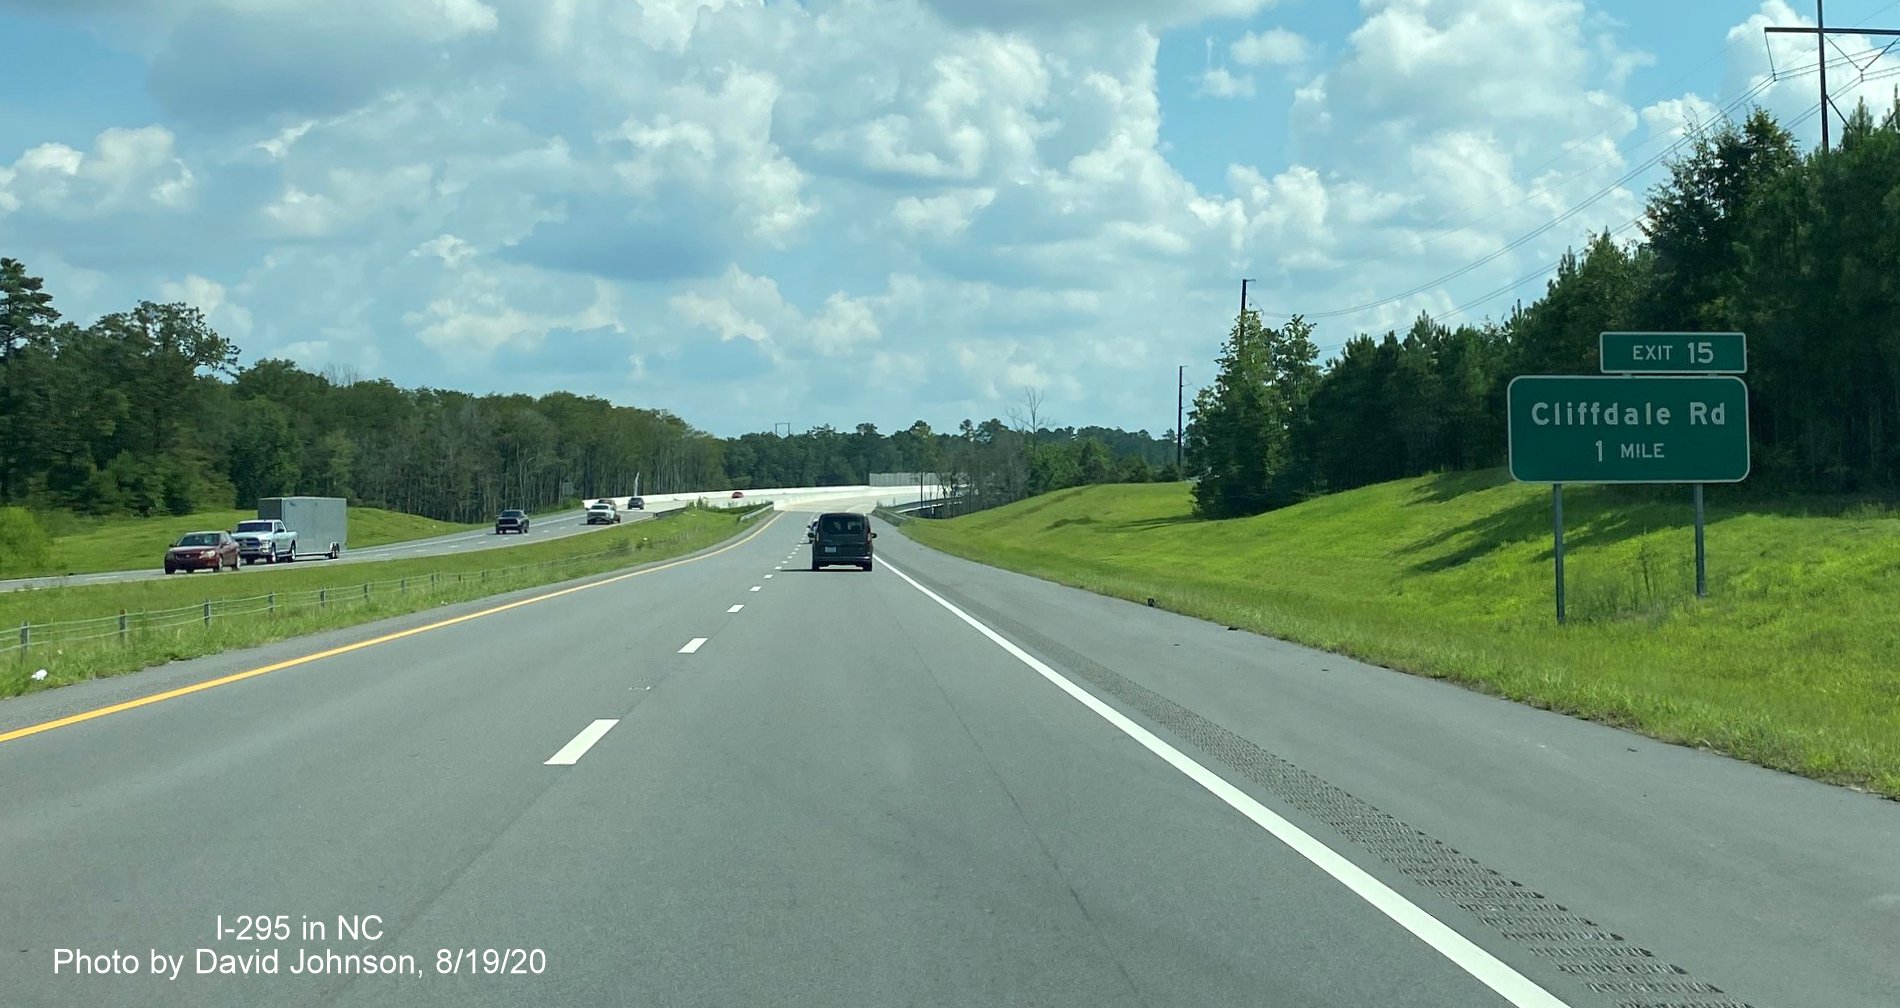 Image of 1-mile ground mounted advance sign for Cliffdale Road, no longer with All Traffic Must Exit banner
        on I-295 South in Fayetteville, by David Johnson August 2020